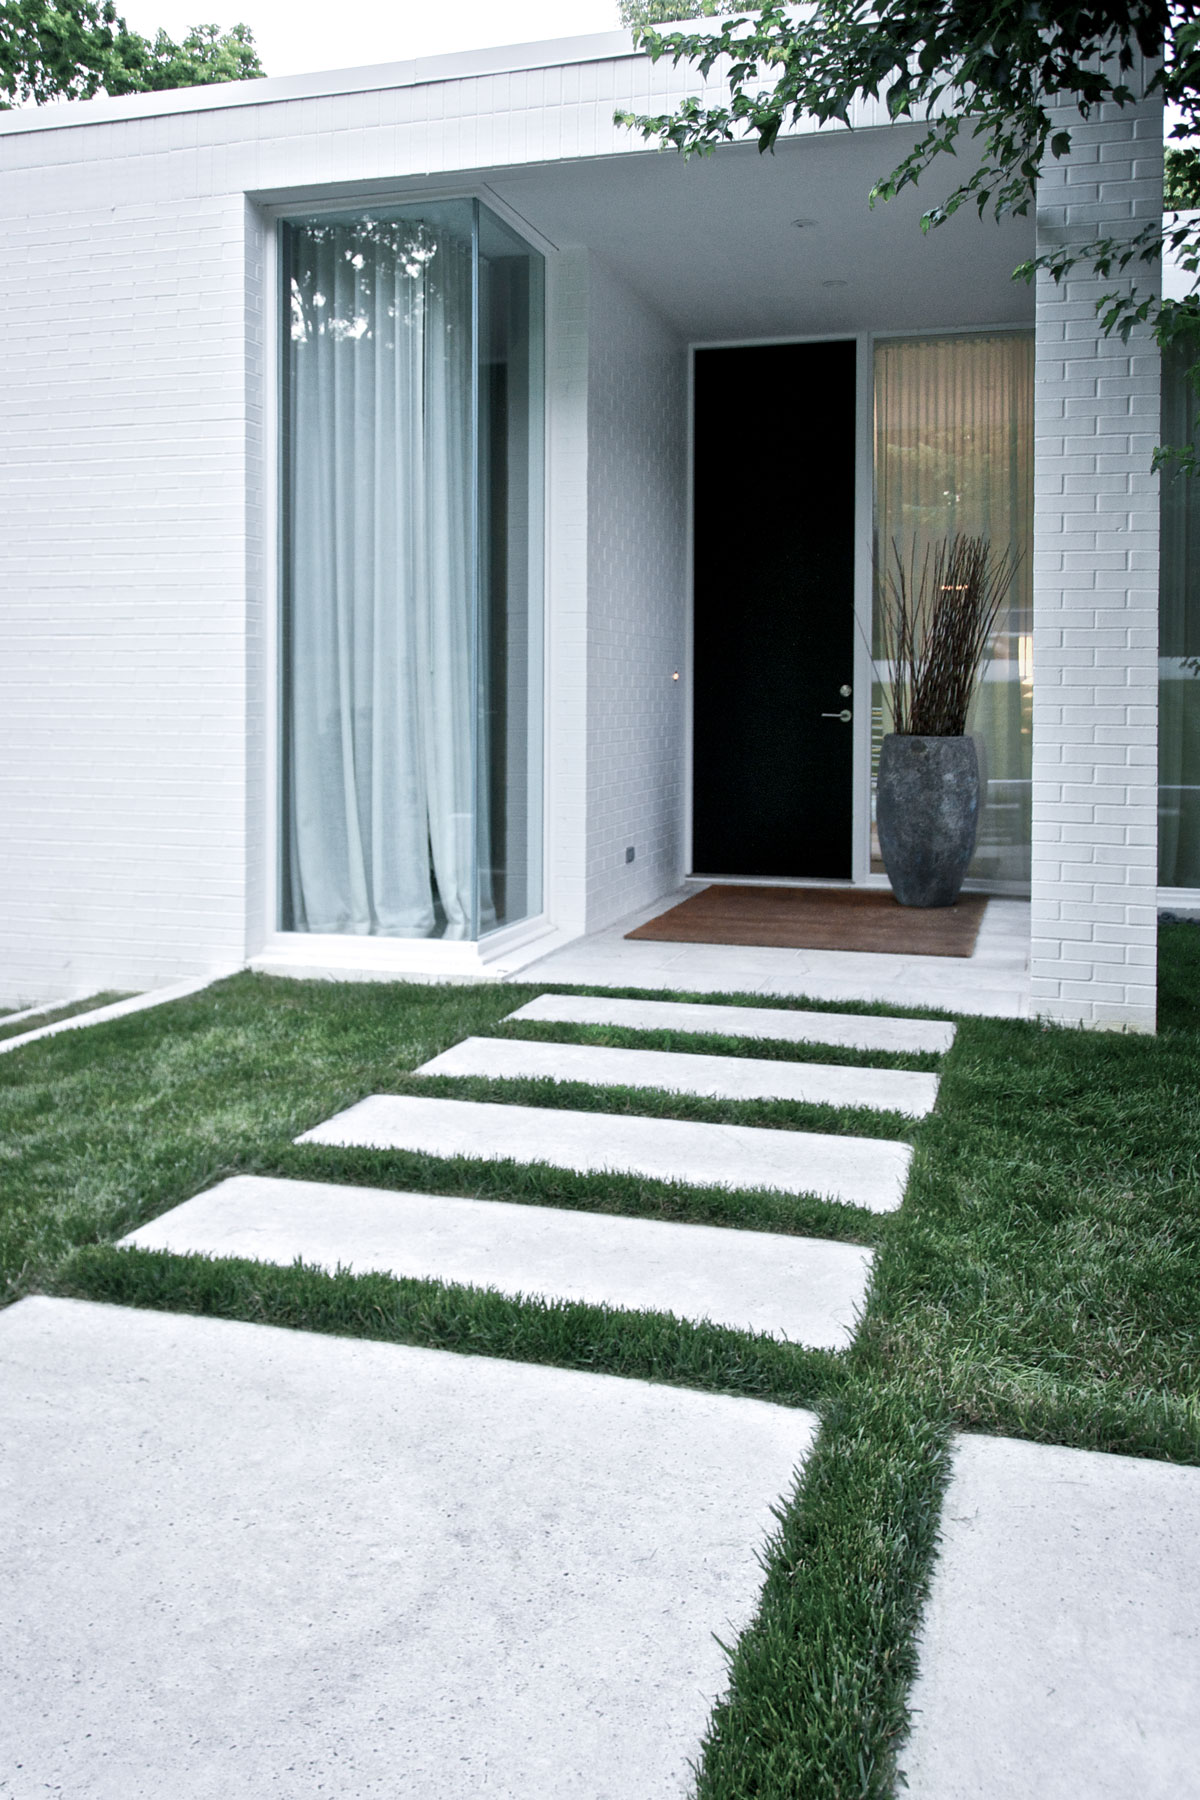 Flat patio pavers make excellent stepping stones for grassy walkways